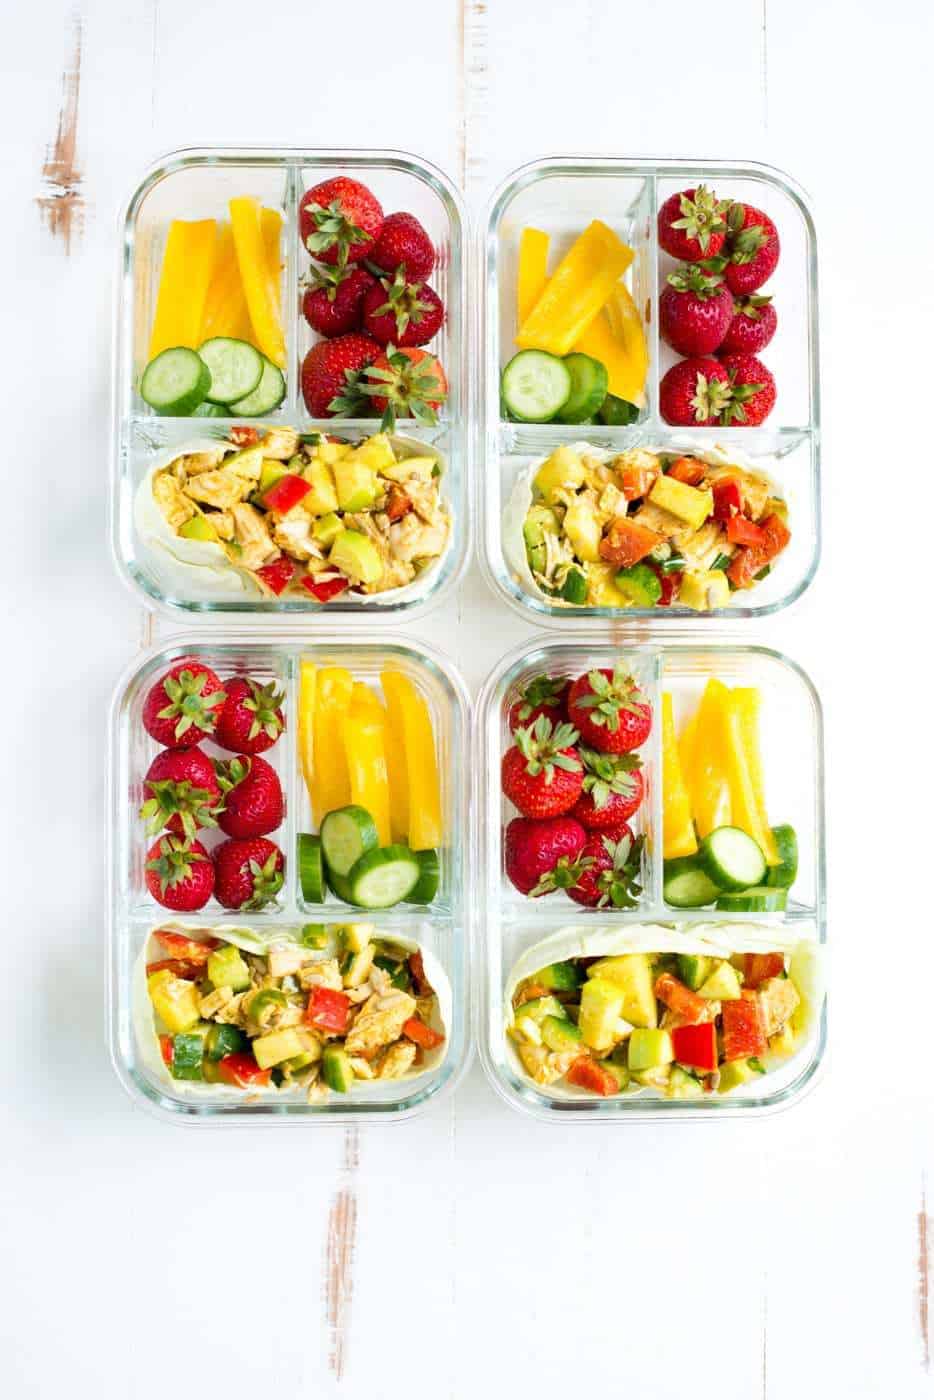 10 Healthy Summer Meal Prep Ideas - Be Centsational